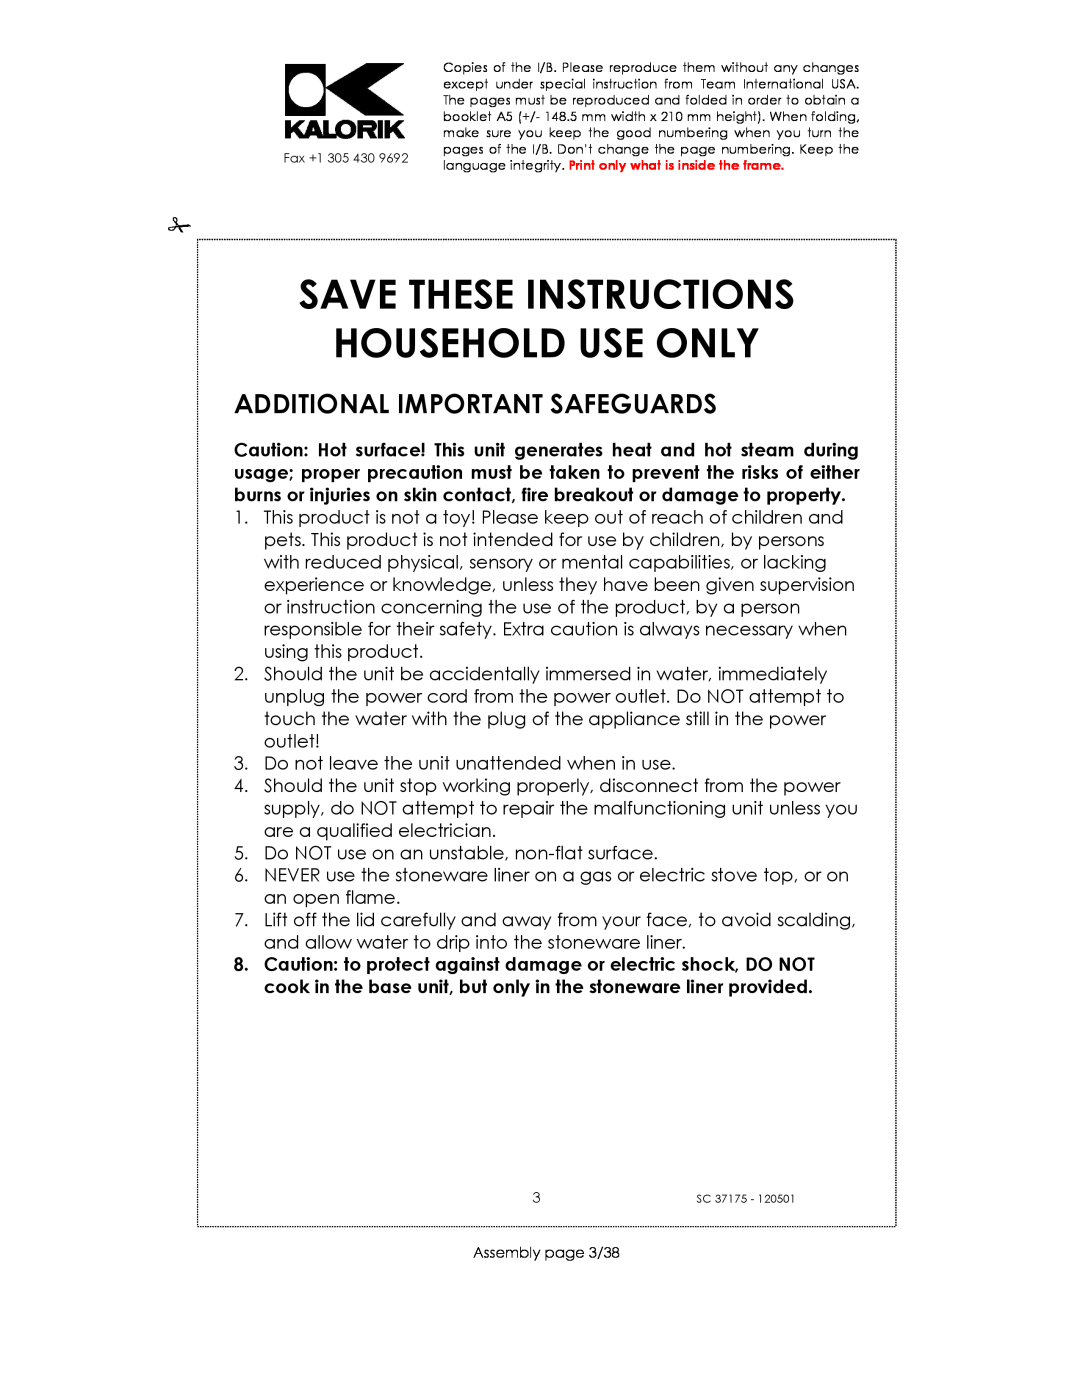 Kalorik SC 37175 manual Save These Instructions Household Use Only, Additional Important Safeguards 